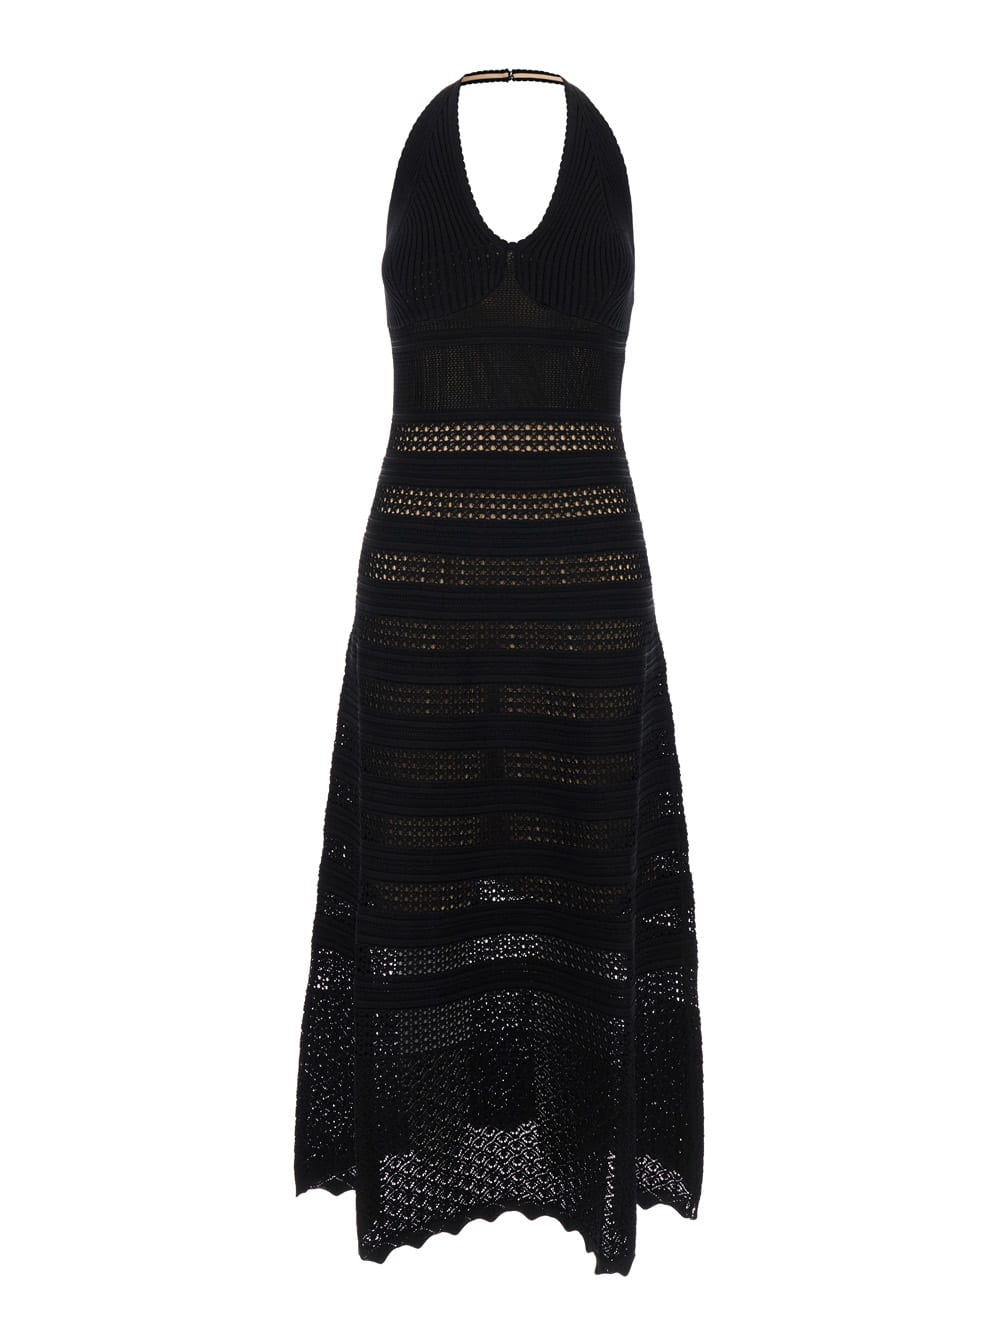 Long Black Perforated Dress With Halterneck In Viscose Blend Woman